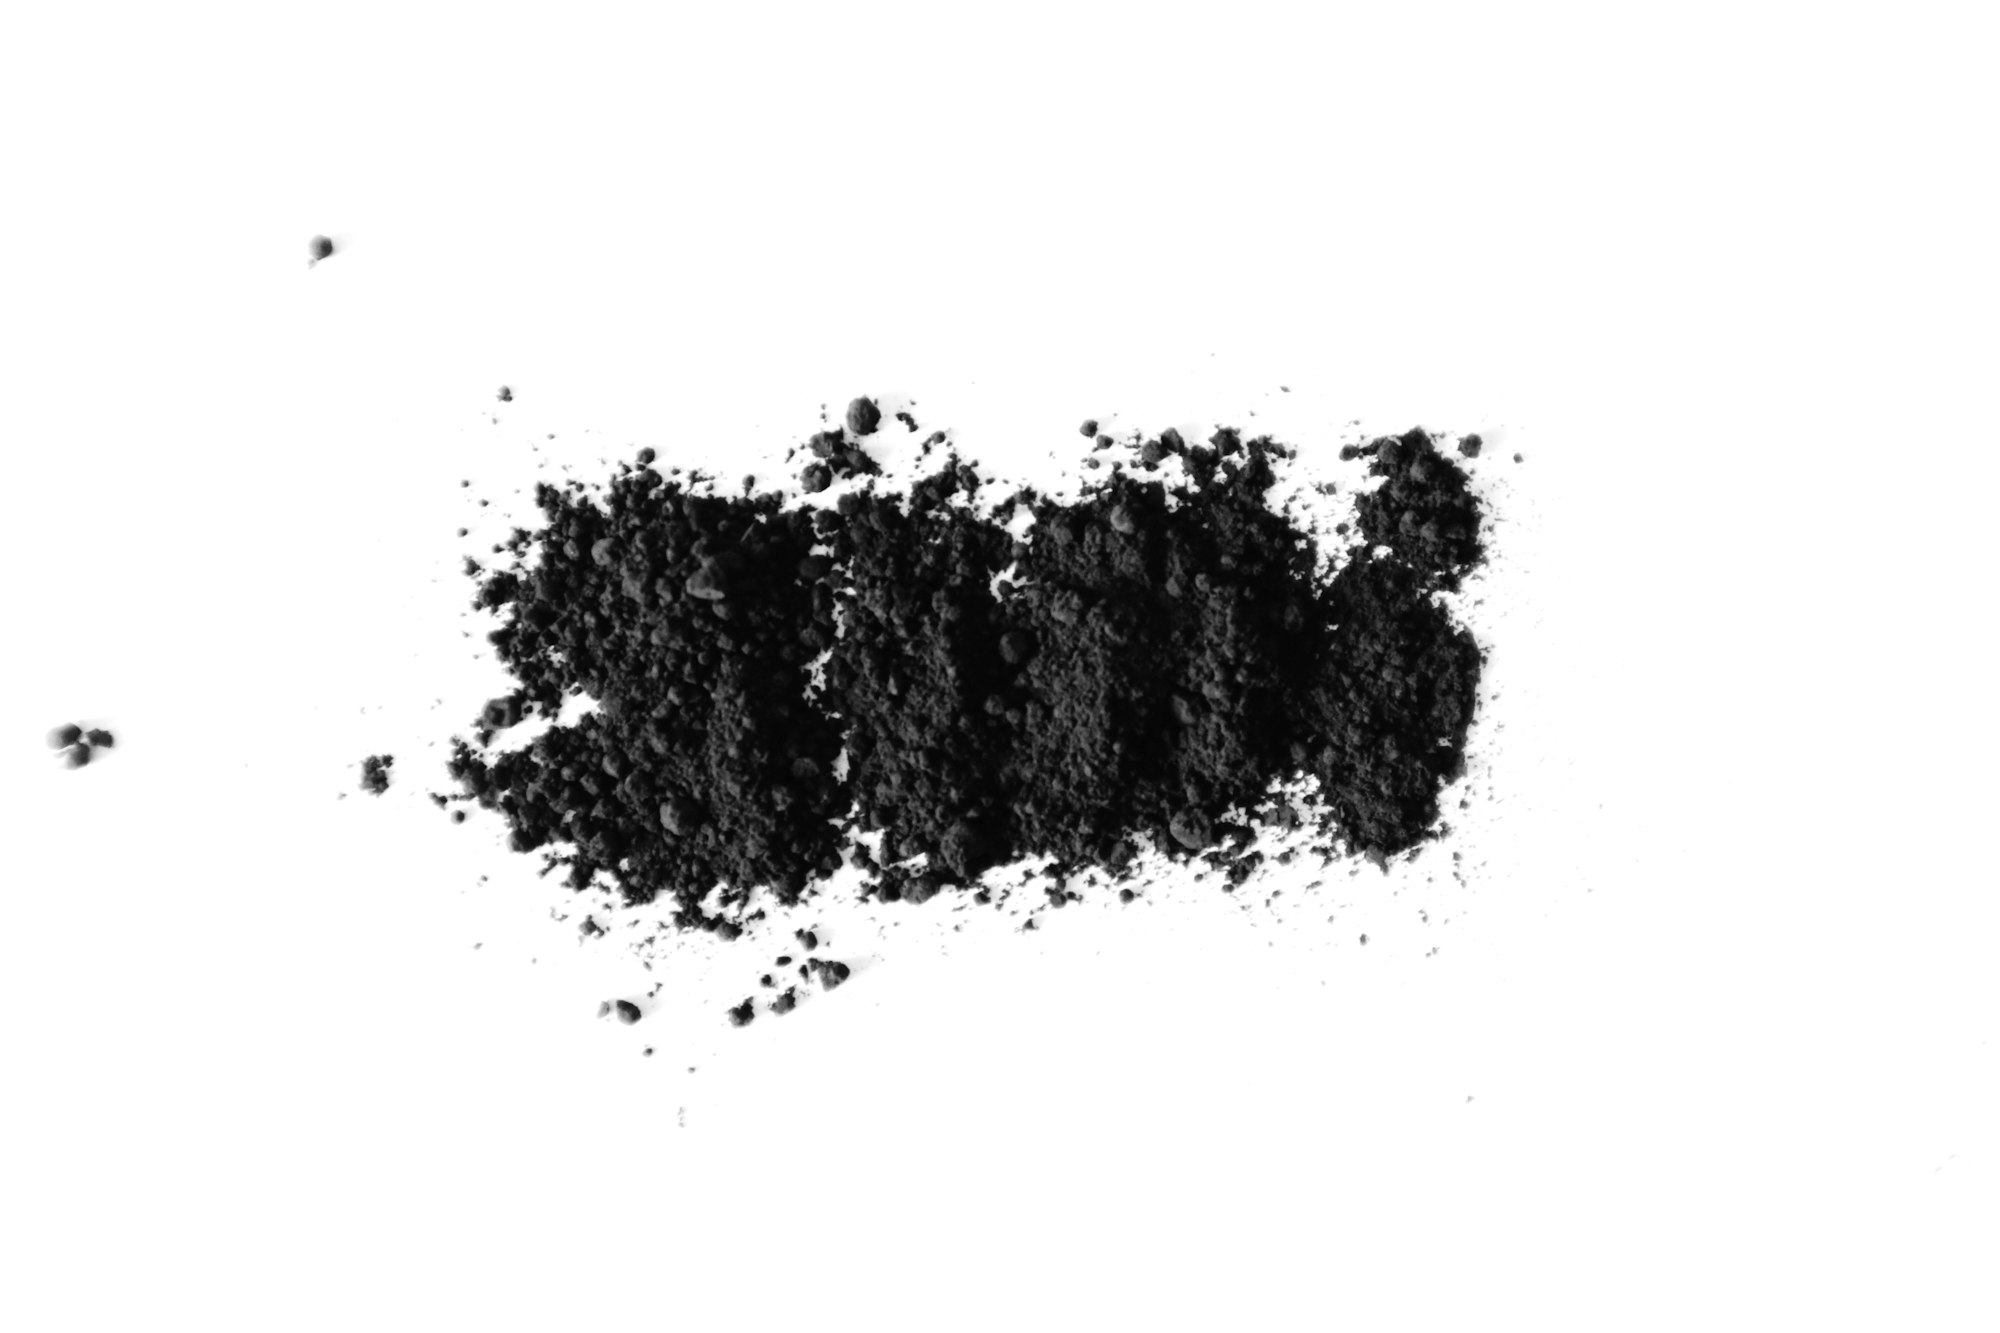 Activated charcoal trend by Adrien Olichon